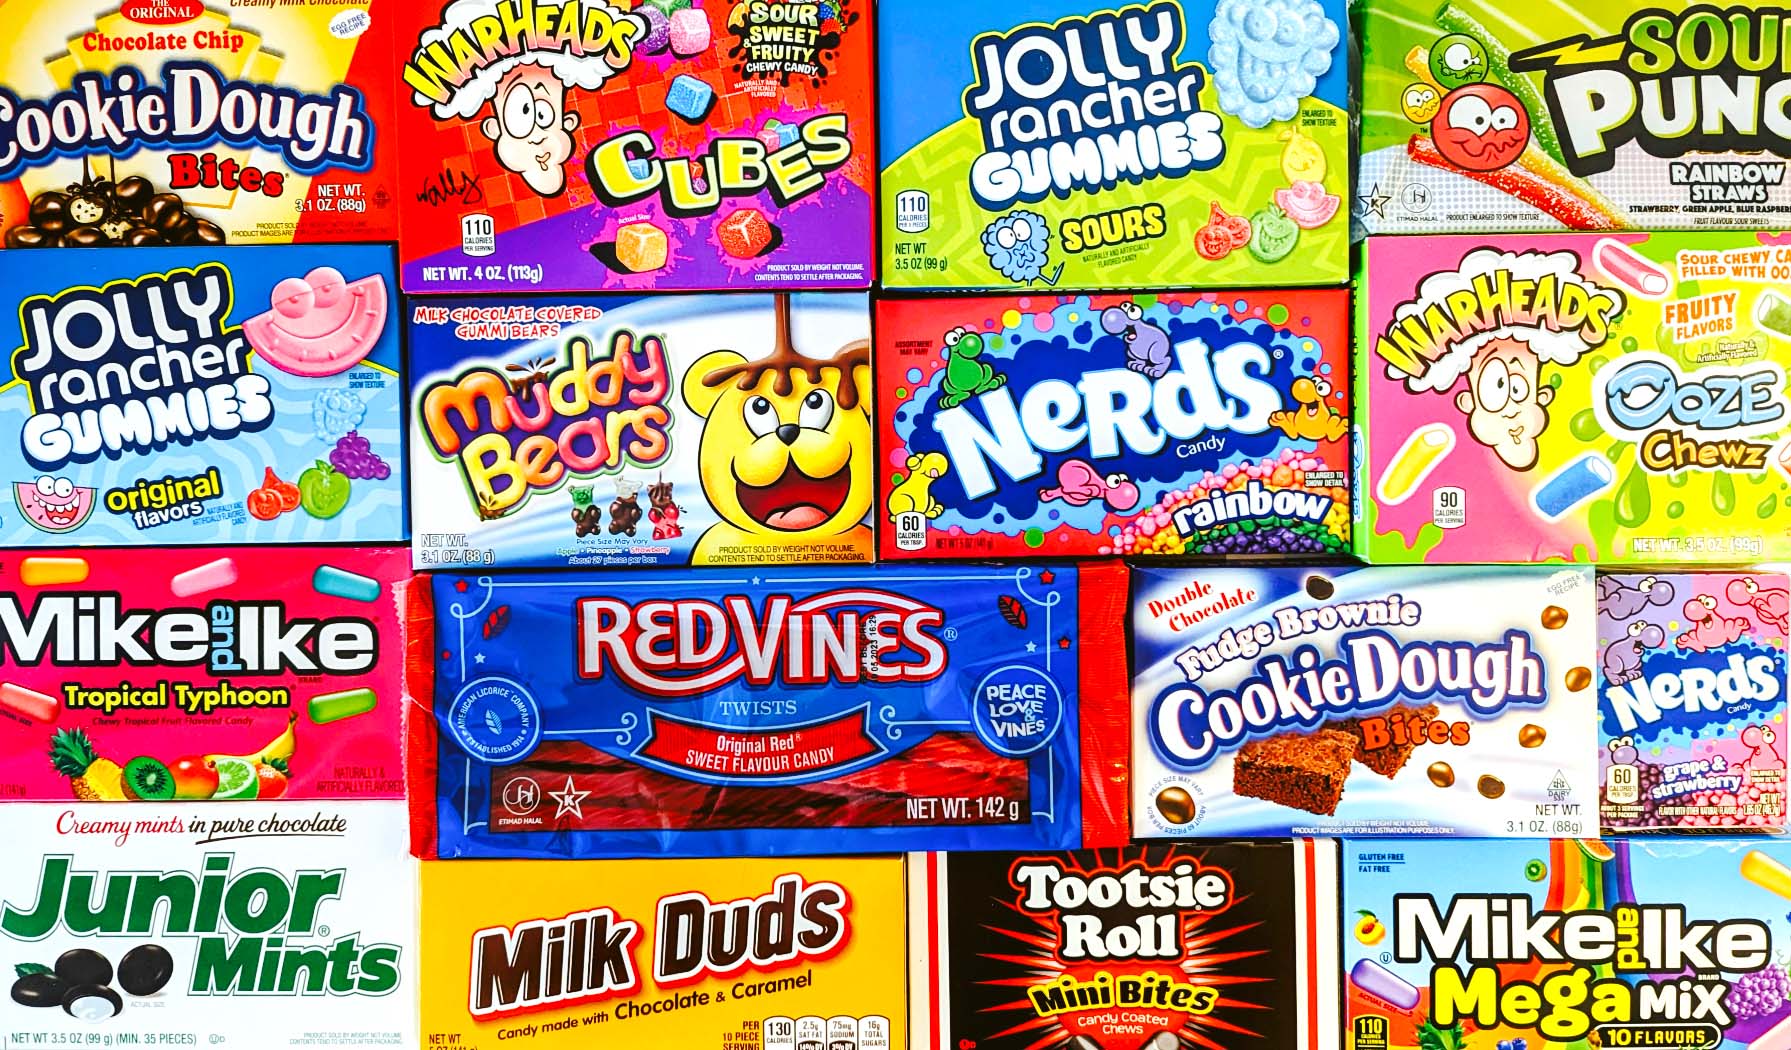 Click Candy Shop - Selling American Sweets, Candy & Snacks in the UK -  Click Candy Shop: American Sweets, Candy & Snacks